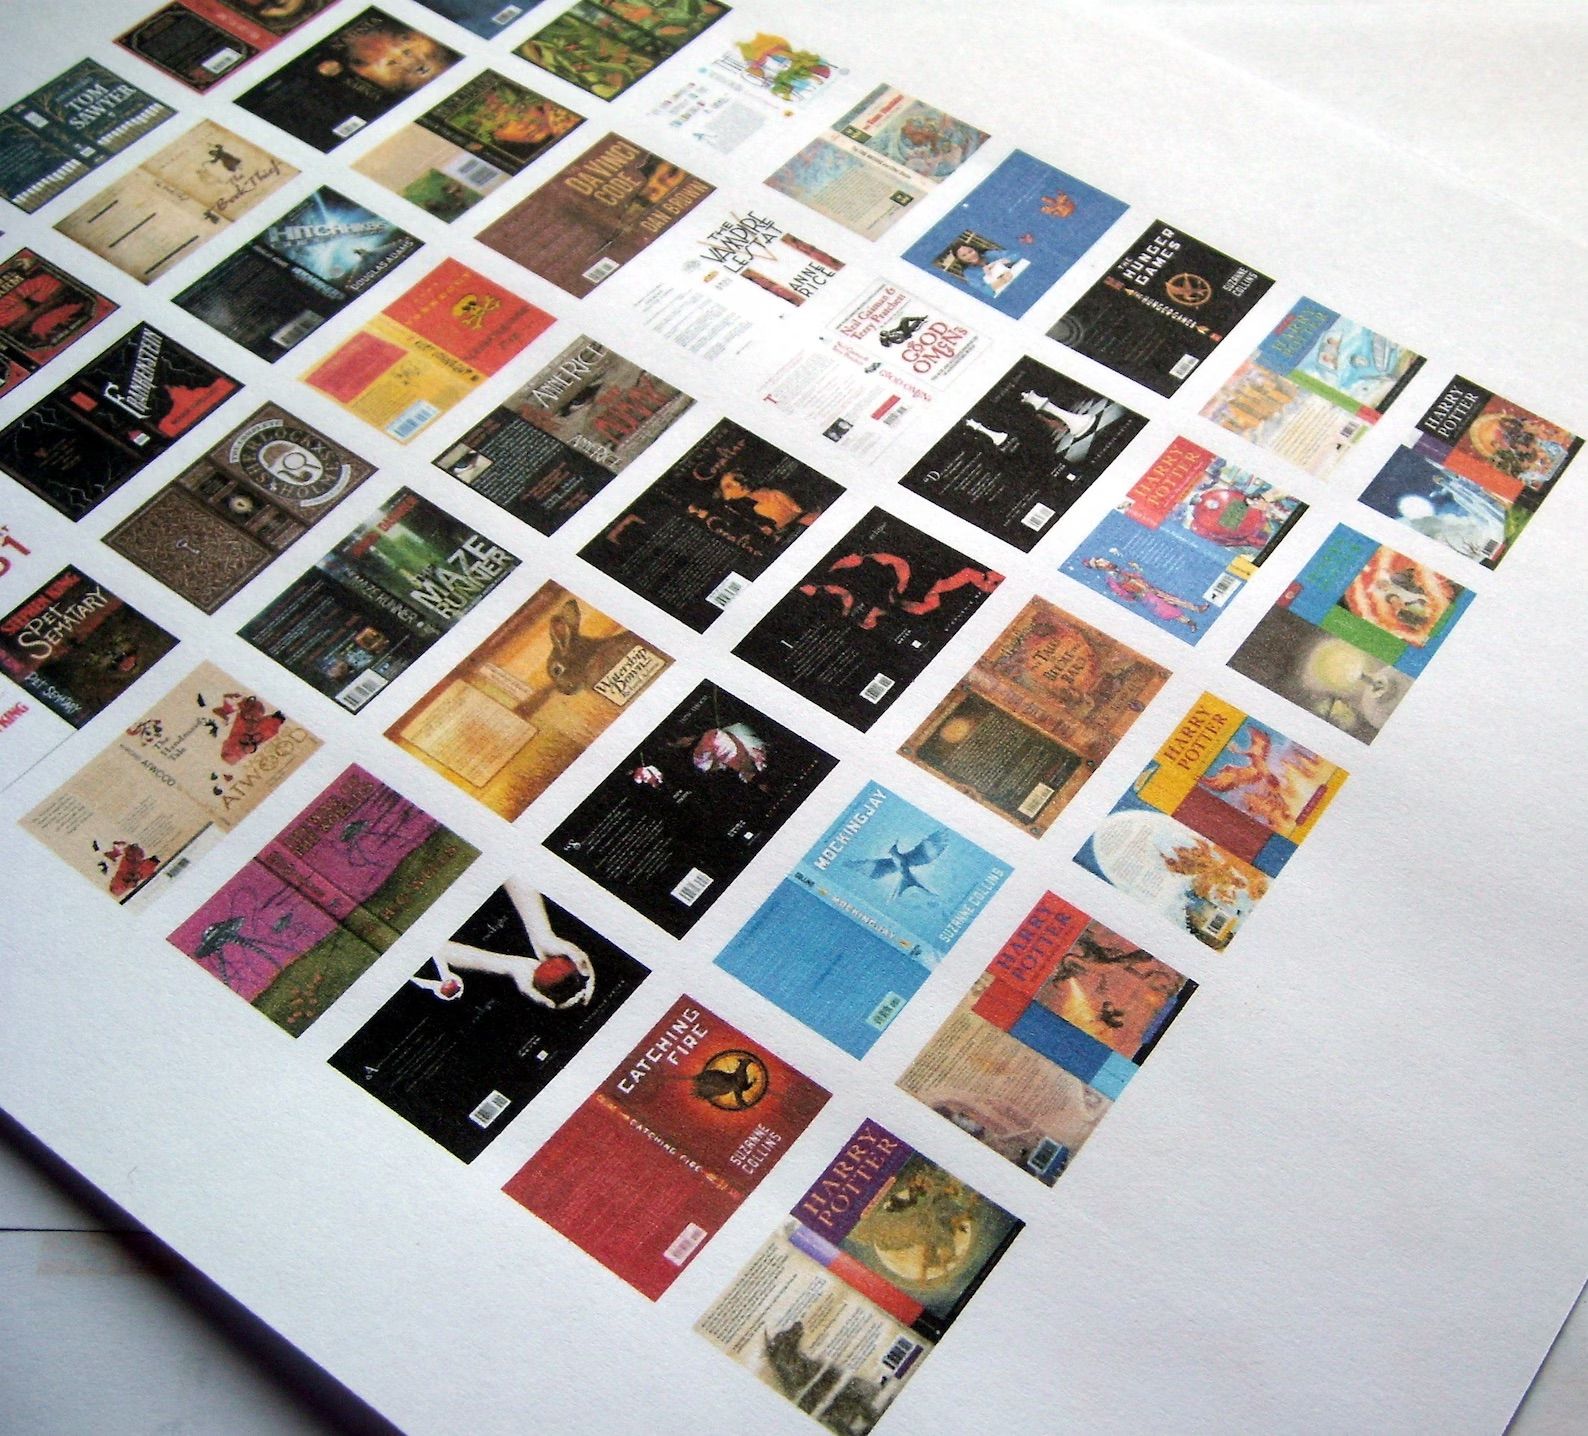 A sheet of paper with rows of book covers printed on it. 